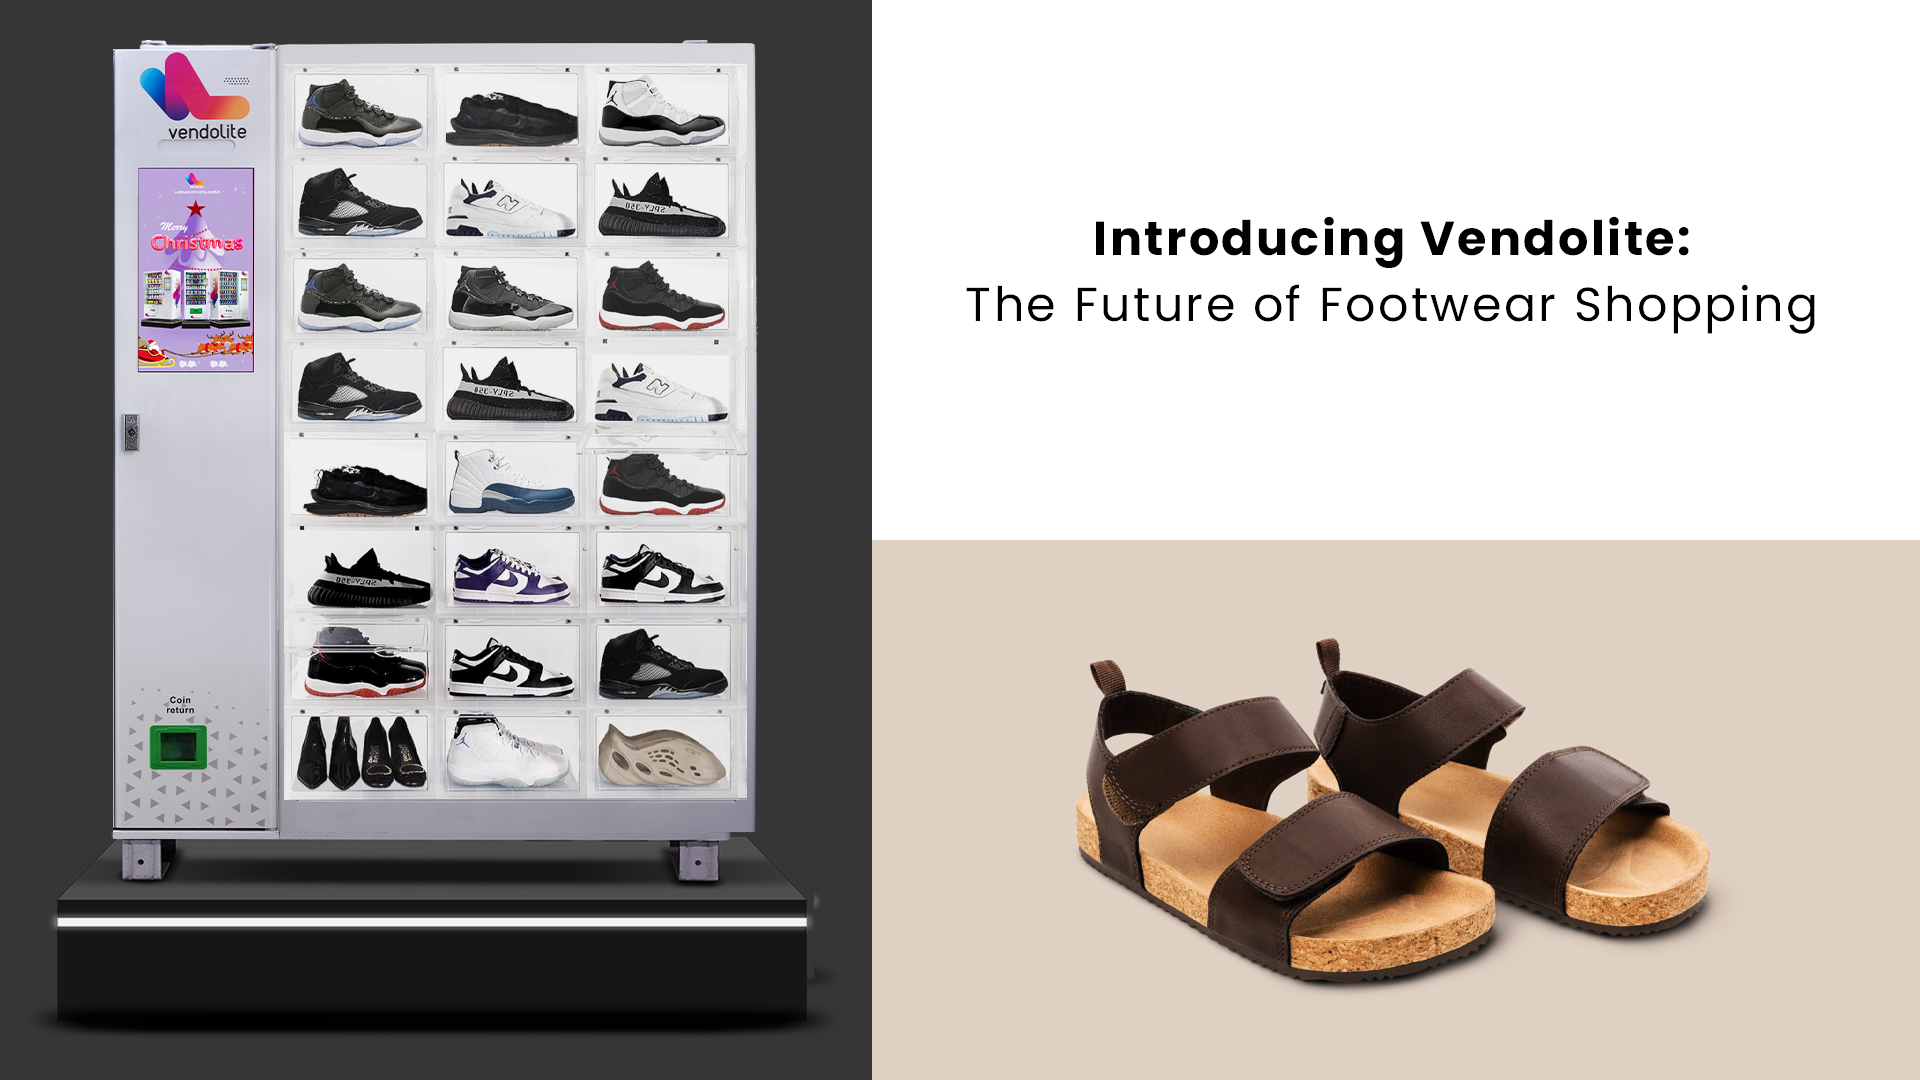 Introducing Vendolite: The Future of Footwear Shopping